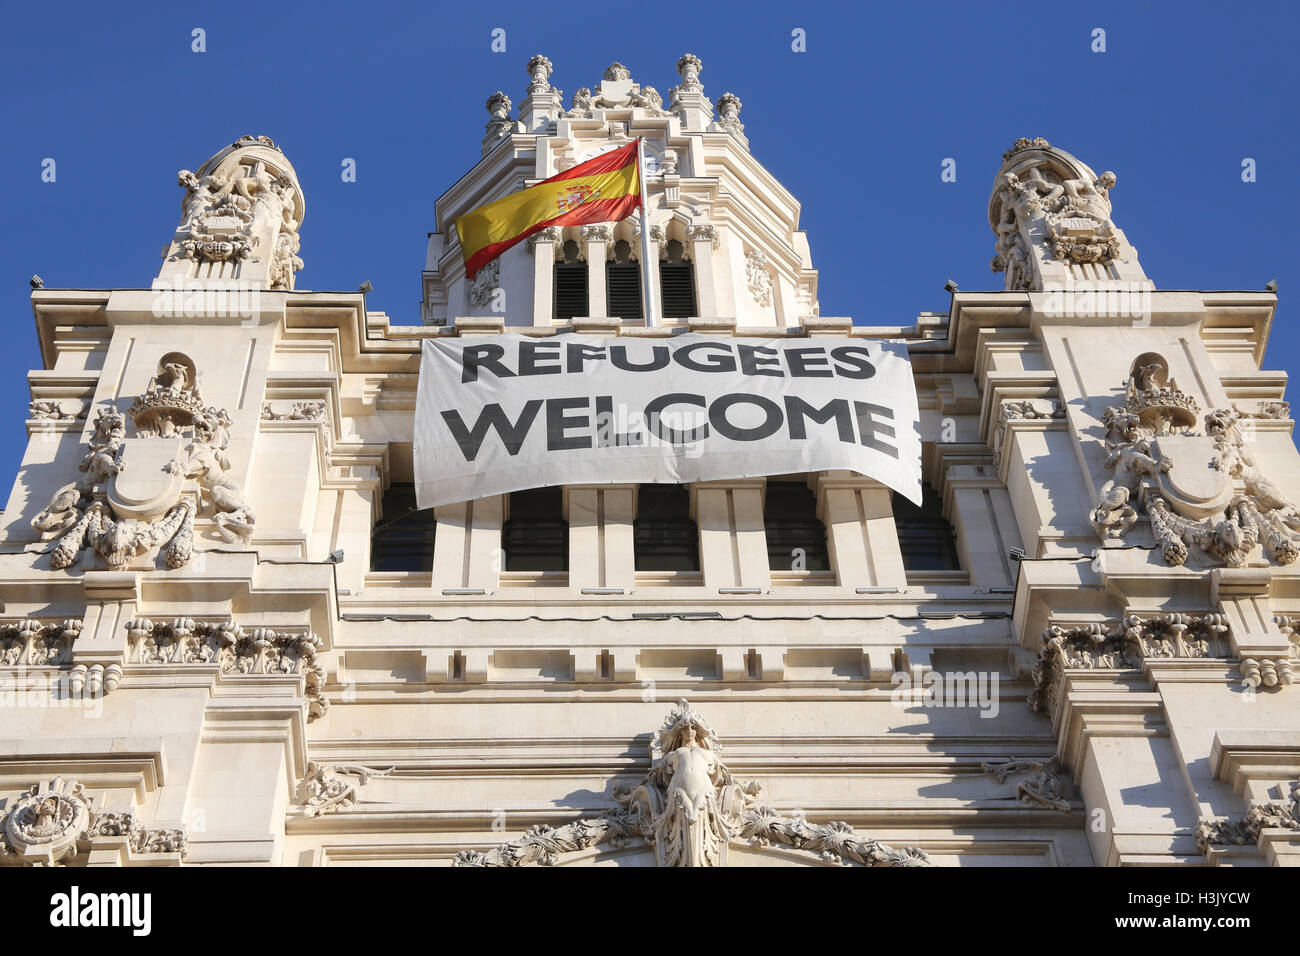 A banner welcoming refugees hangs from the Cybele Palace, Madrid's City Hall on the Plaza de Cibeles, Madrid, Spain Stock Photo